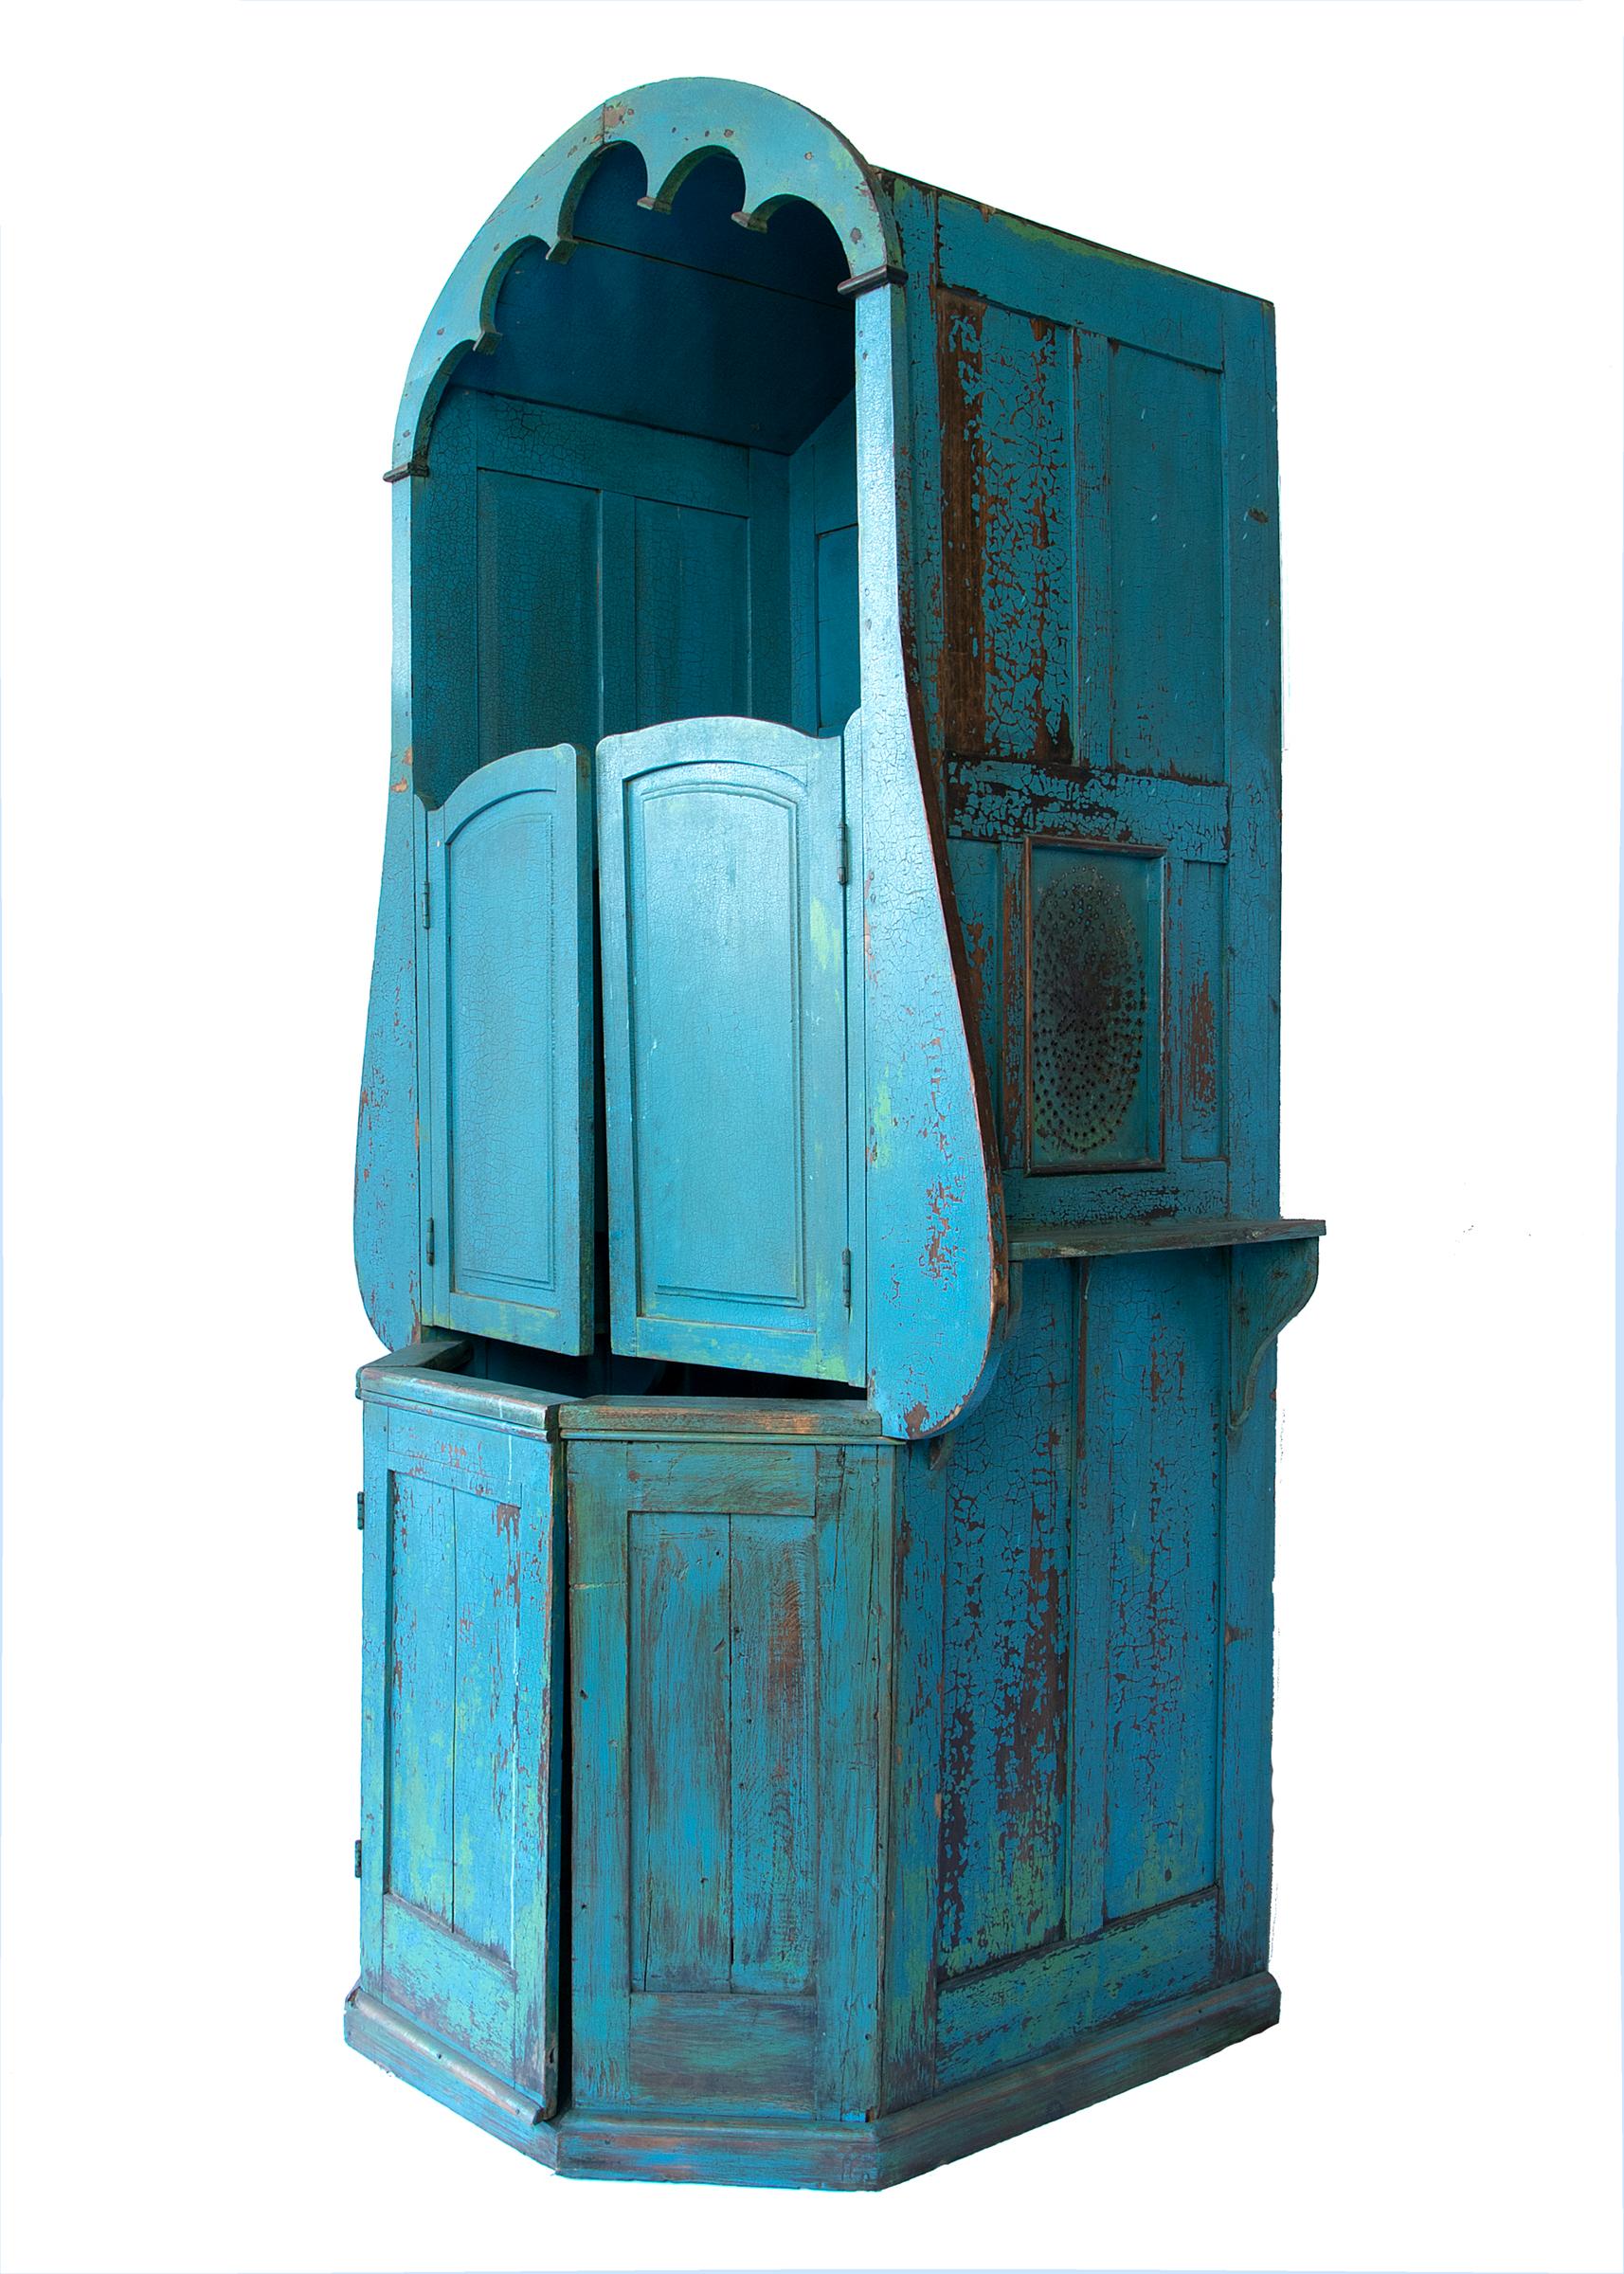 Painted Confessional Booth, Late 19th Century/Early 20th Century, Mexican